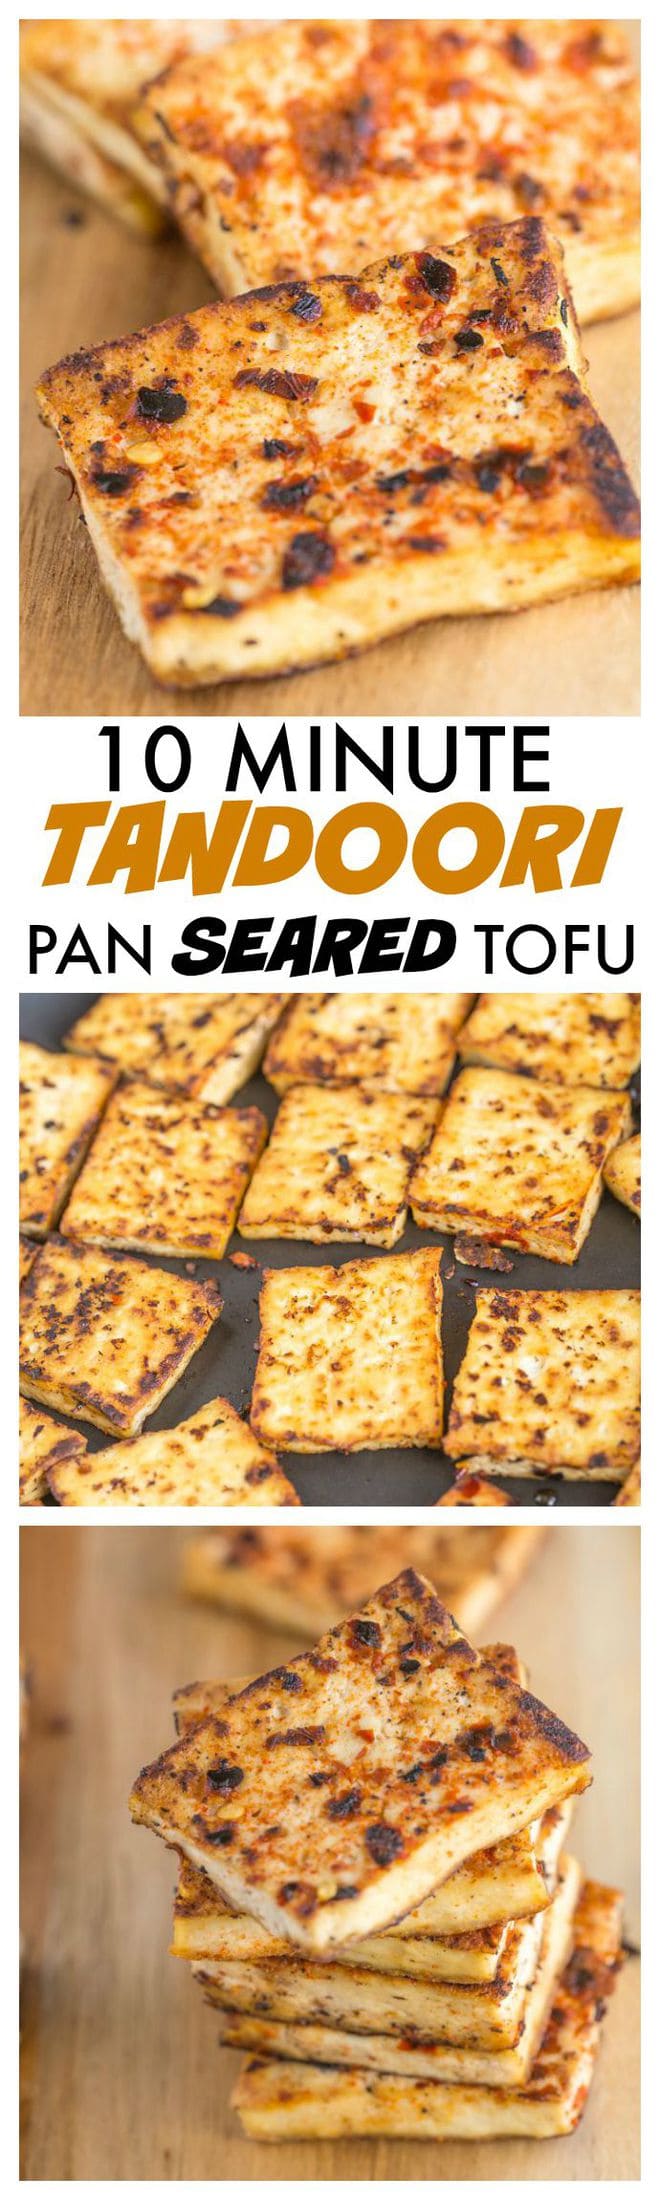 Easy Tandoori Pan Seared Tofu which takes 10 minutes and is a delicious, quick and easy weeknight dinner or lunch- It freezes beautifully too! 